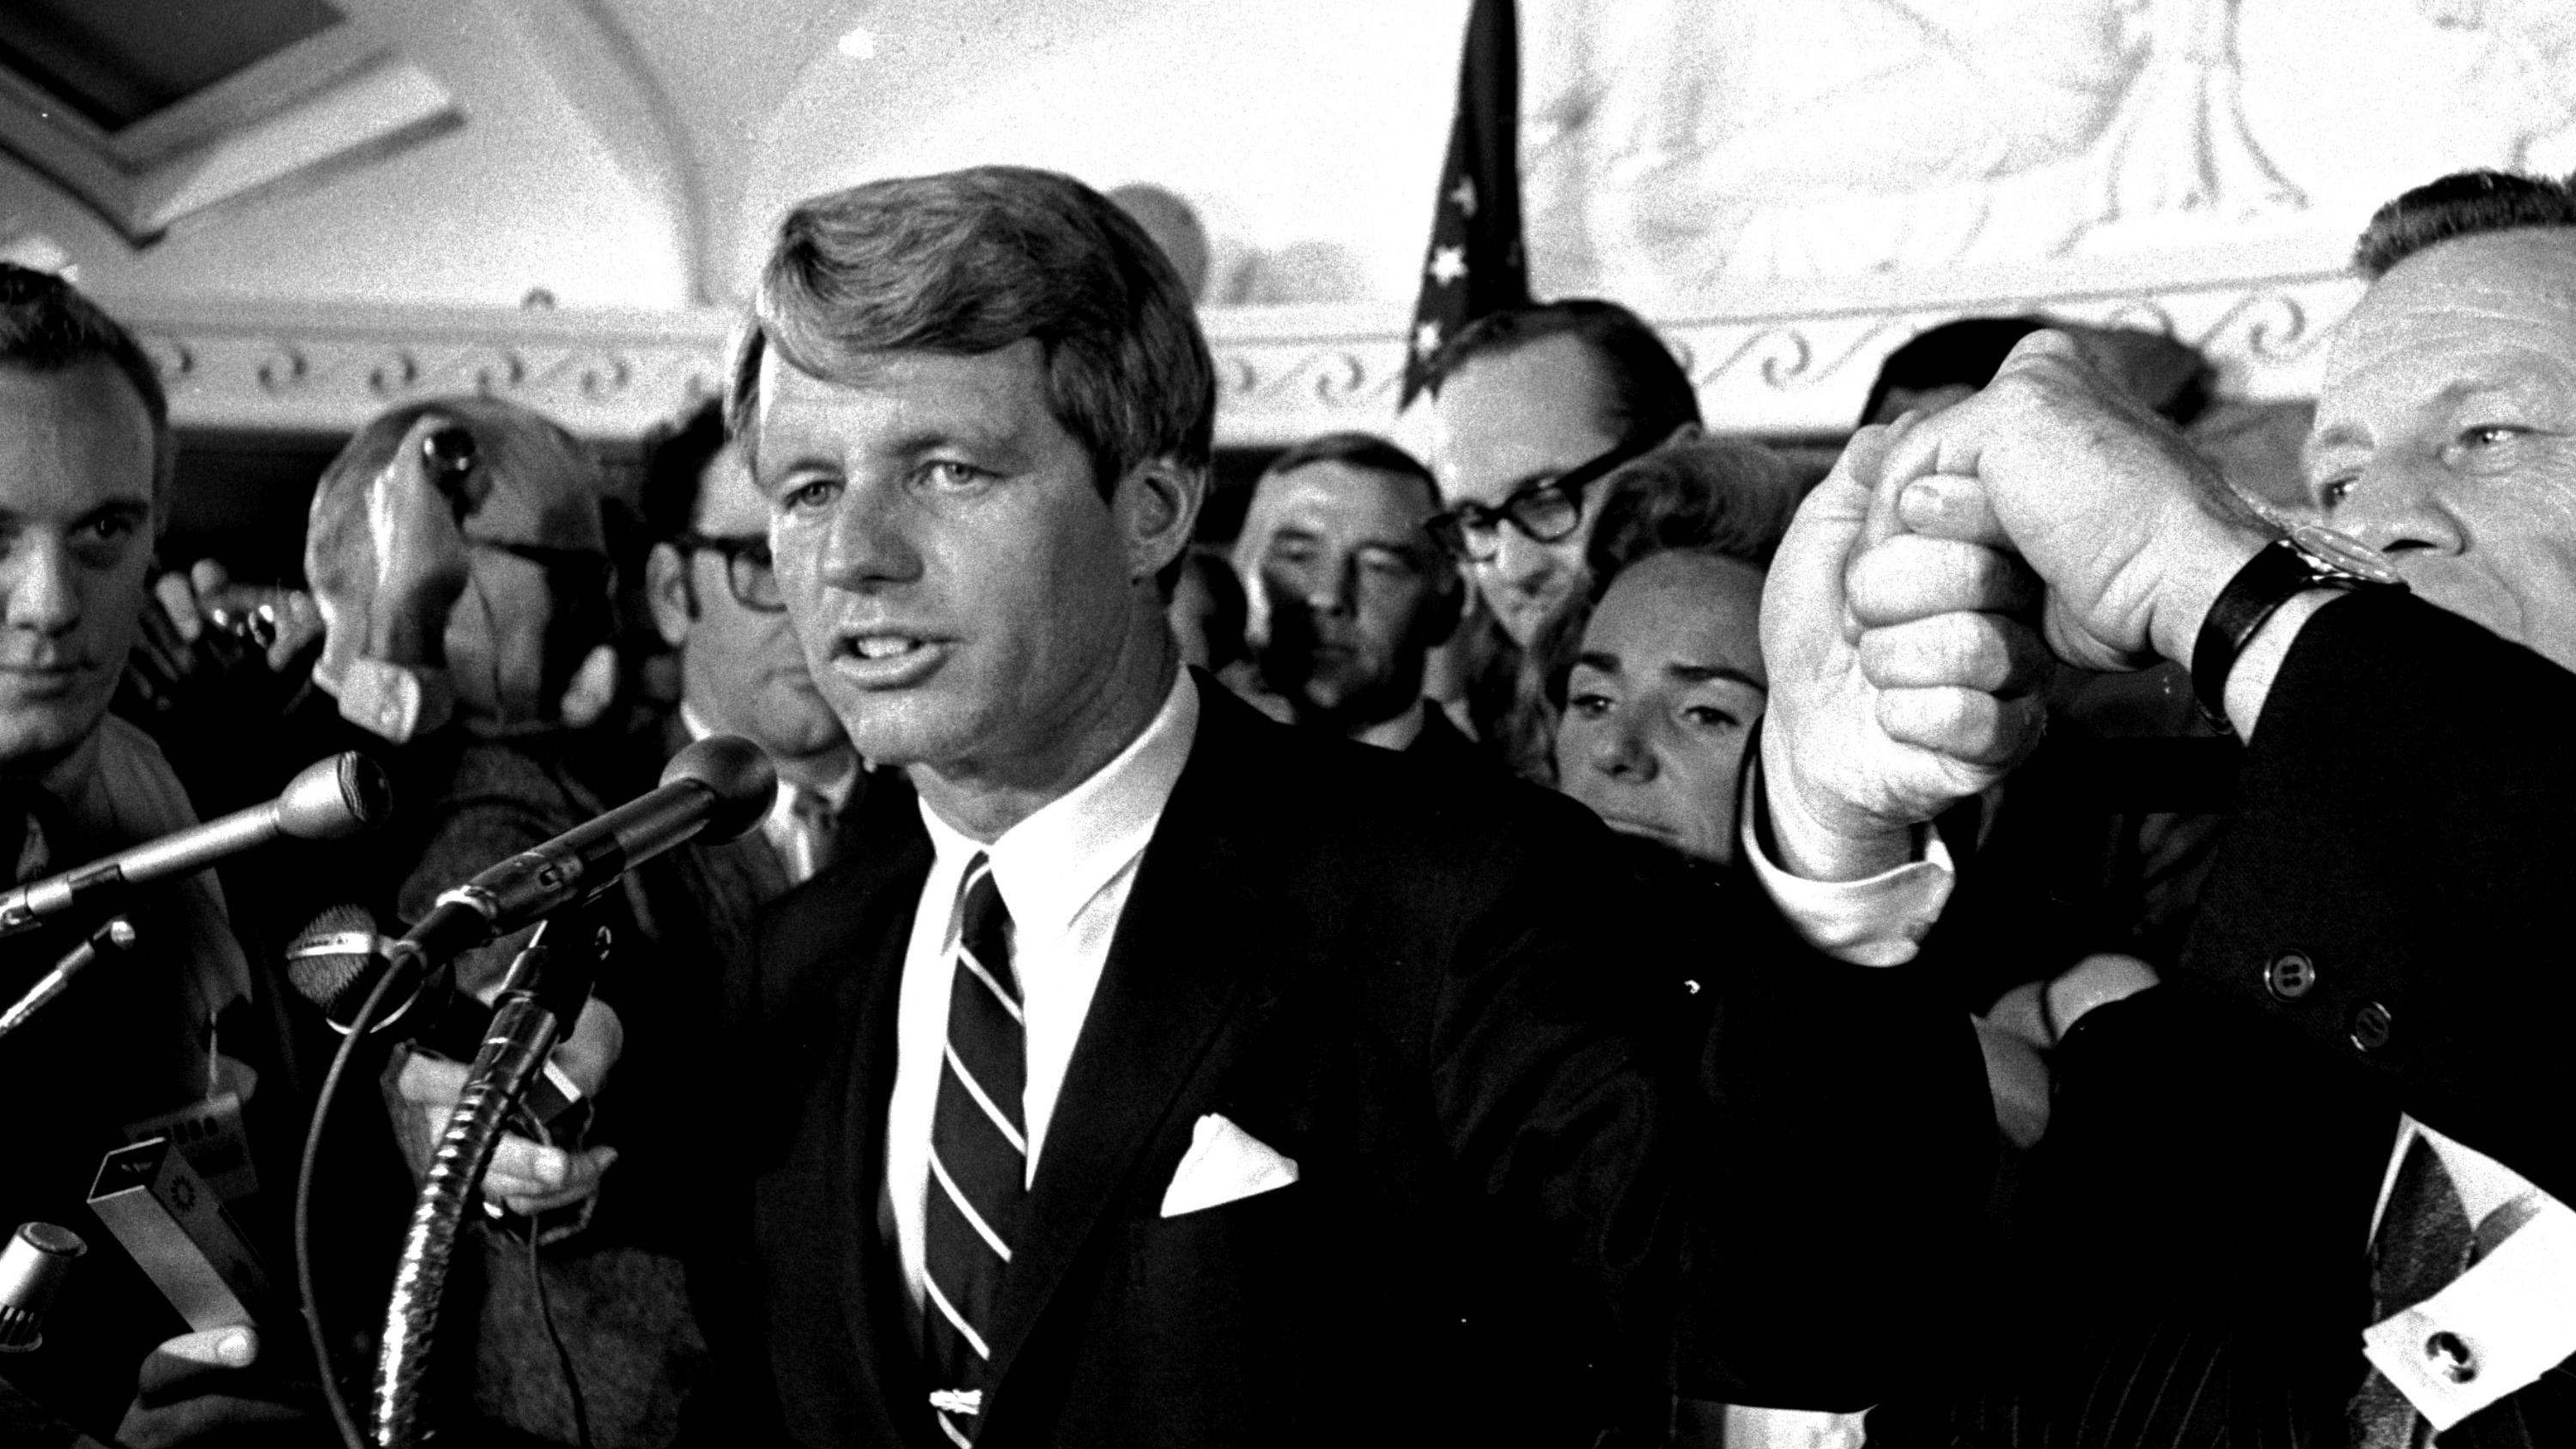 Sen. Robert F. Kennedy addresses a throng of supporters in the Ambassador Hotel in Los Angeles early in the morning of June 5, 1968, following his victory in the previous day's California primary election.  A moment later he turned into a hotel kitch